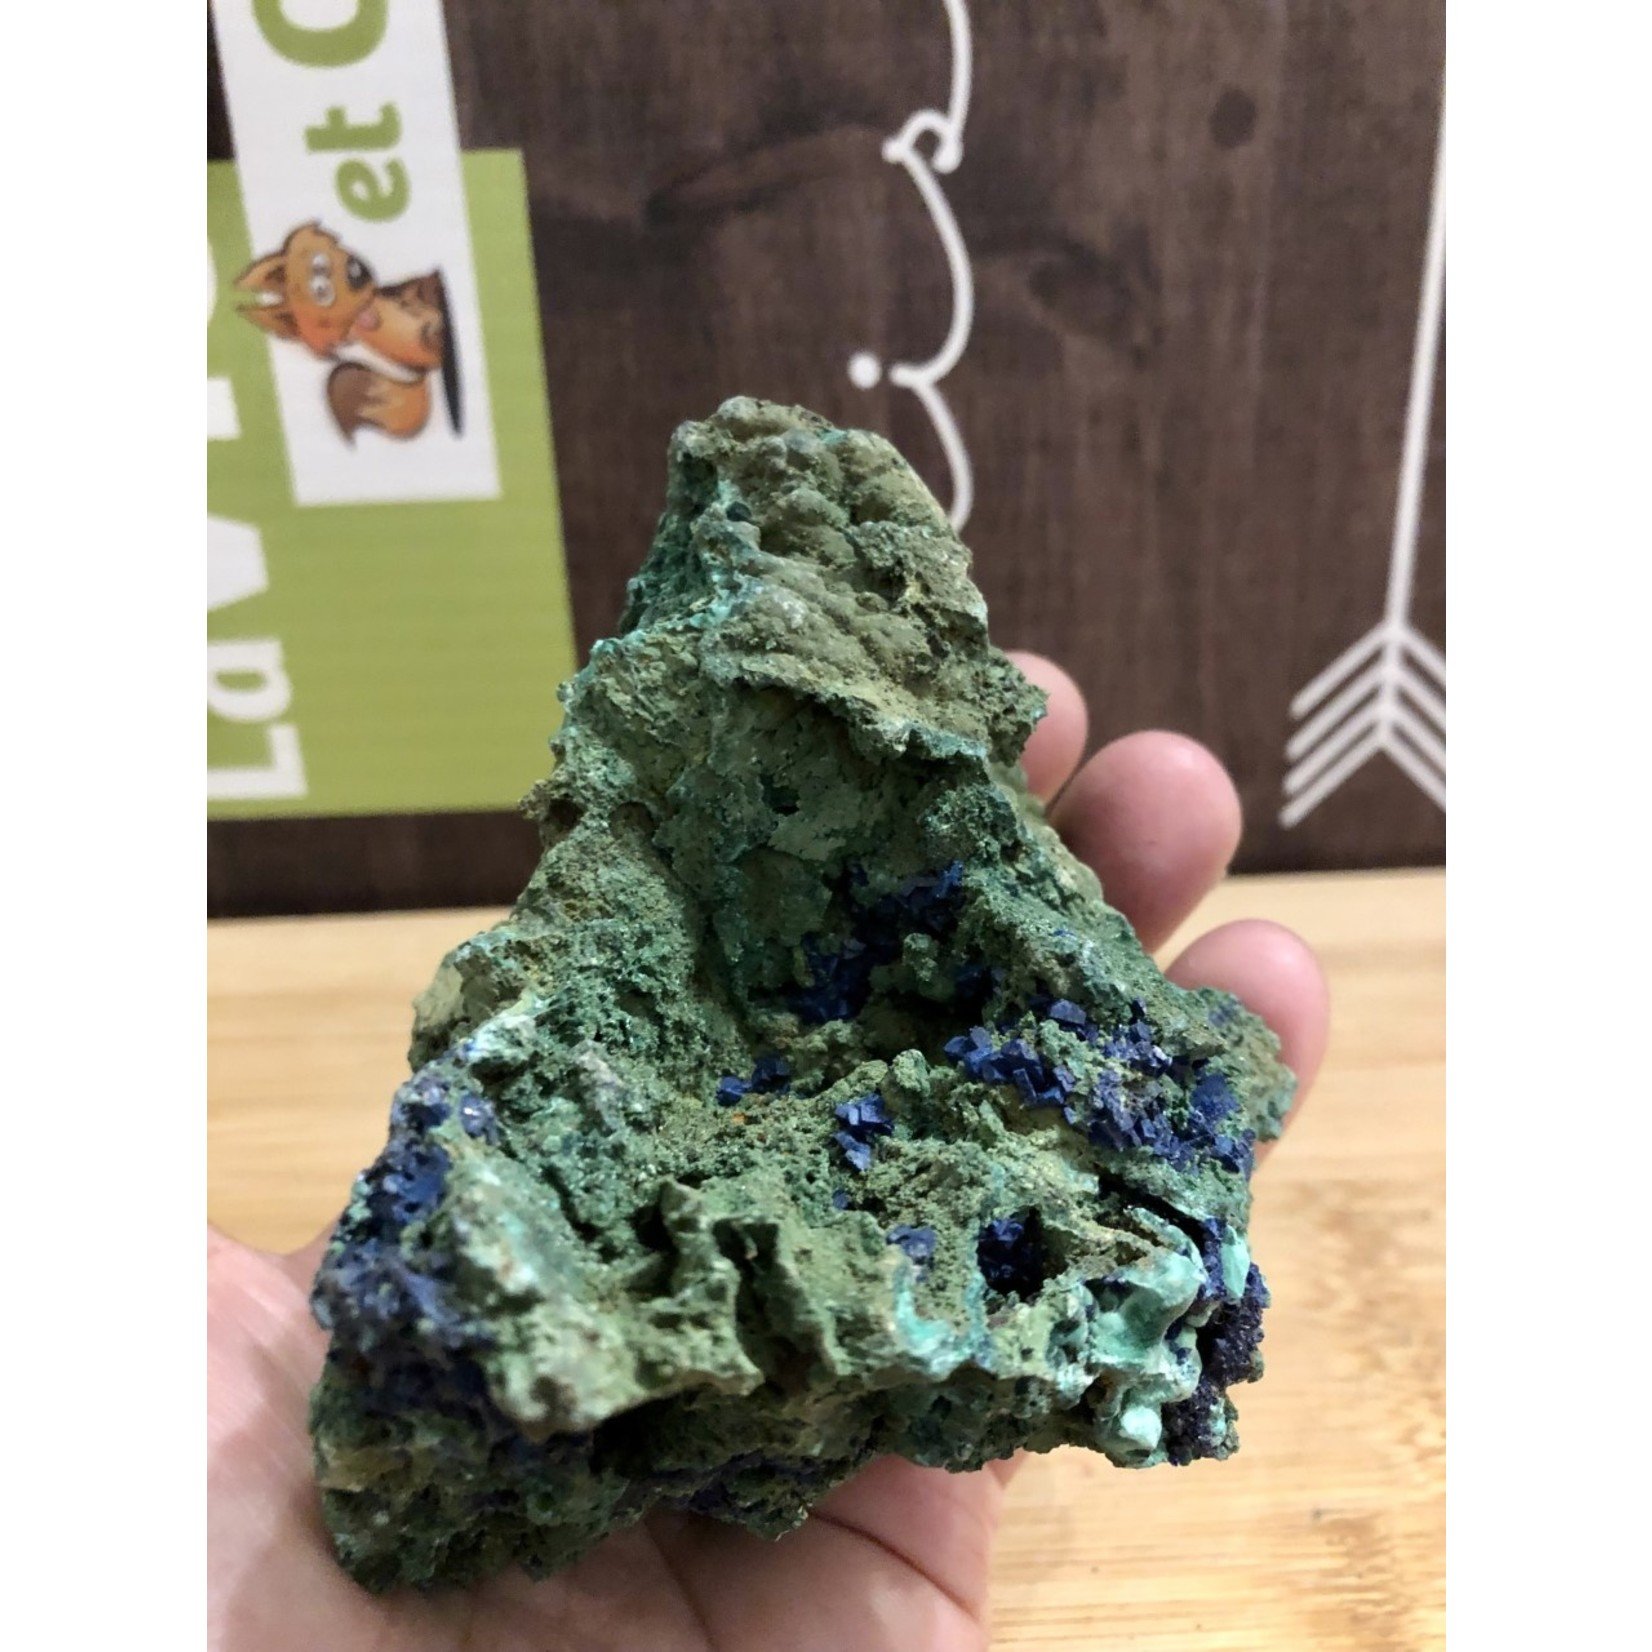 huge azurite malachite rough, stimulates creativity, helps with concentration, great stone for astral travel